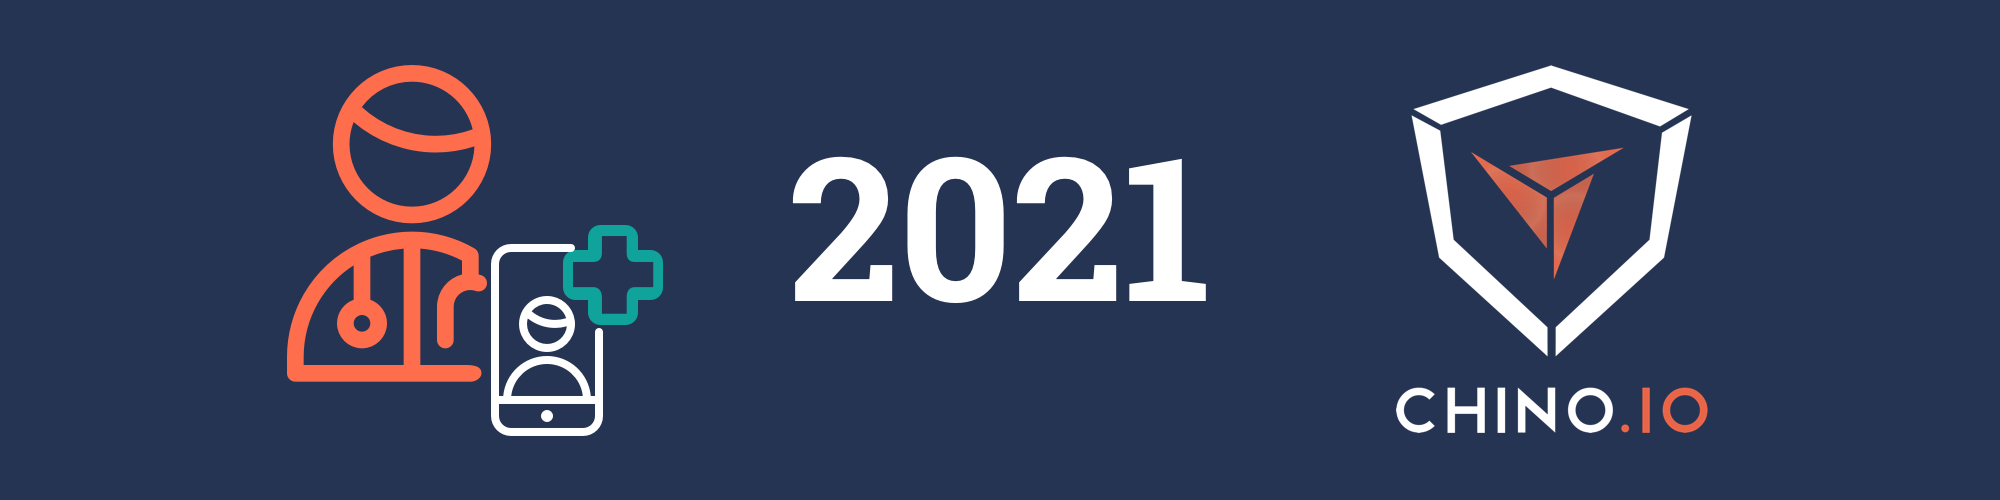 2021: predictions for the digital health sector